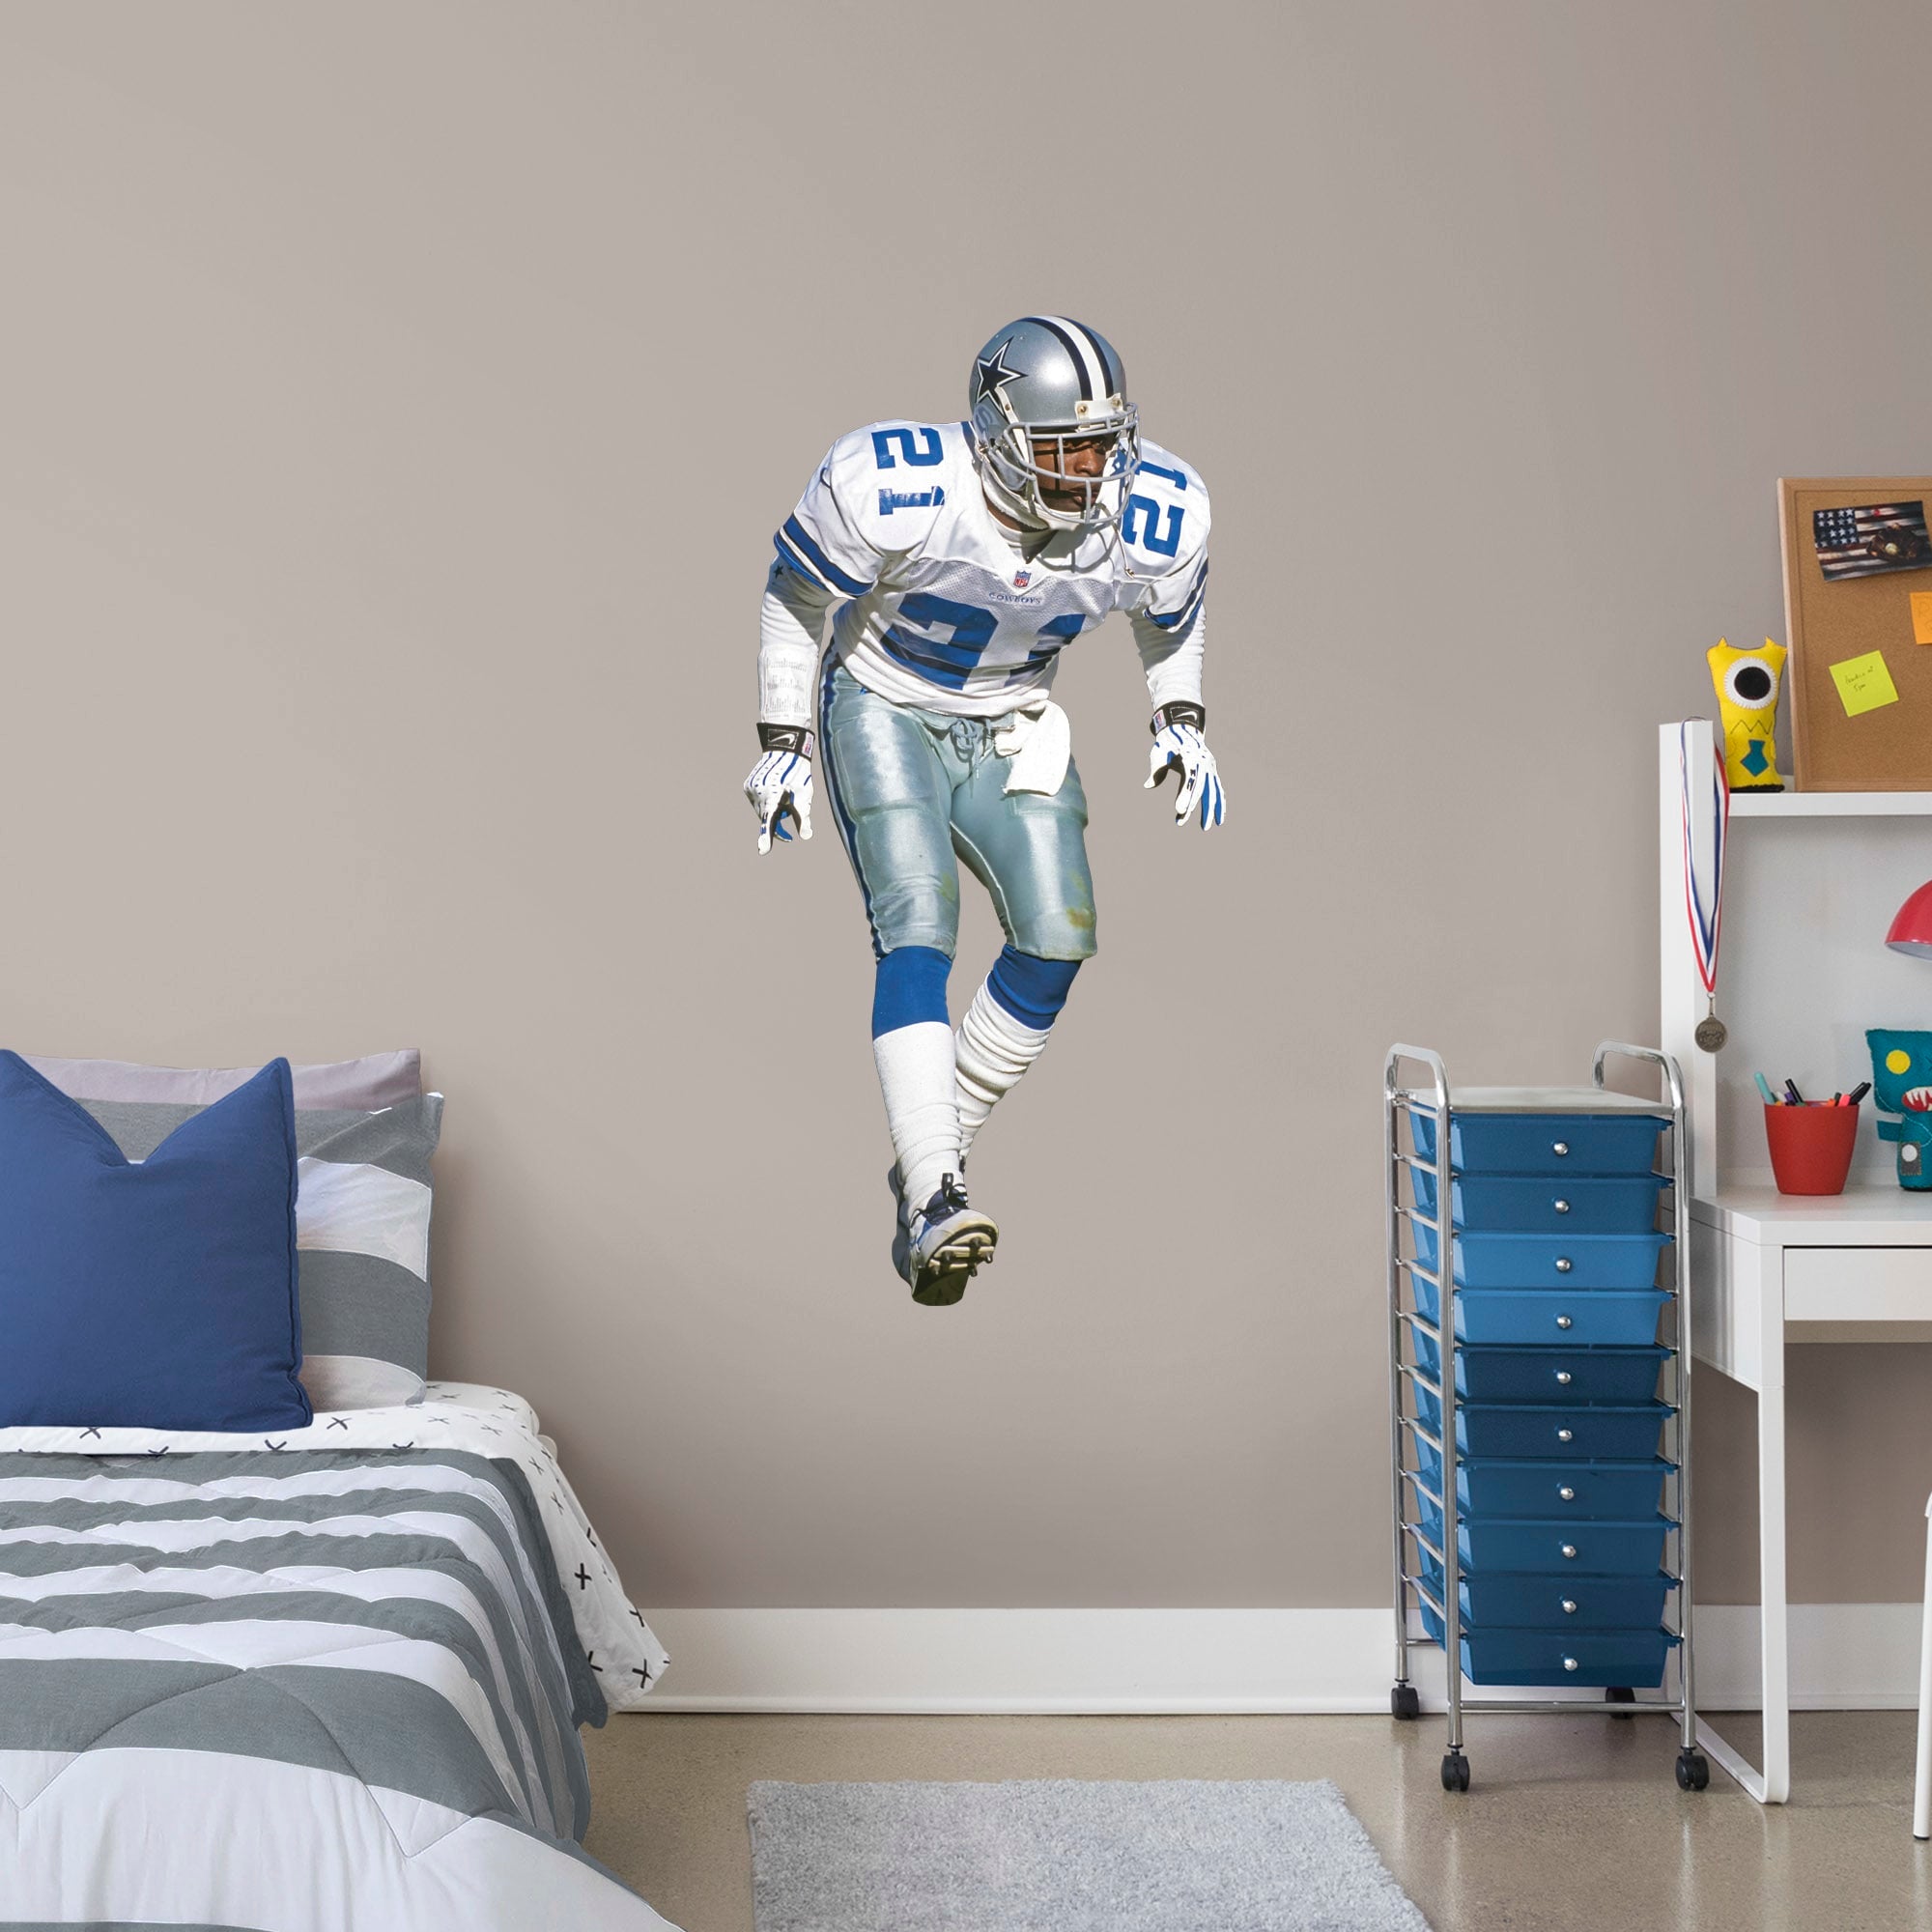 Deion Sanders for Dallas Cowboys: Legend - Officially Licensed NFL Removable Wall Decal Giant Athlete + 2 Decals (25"W x 51"H) b